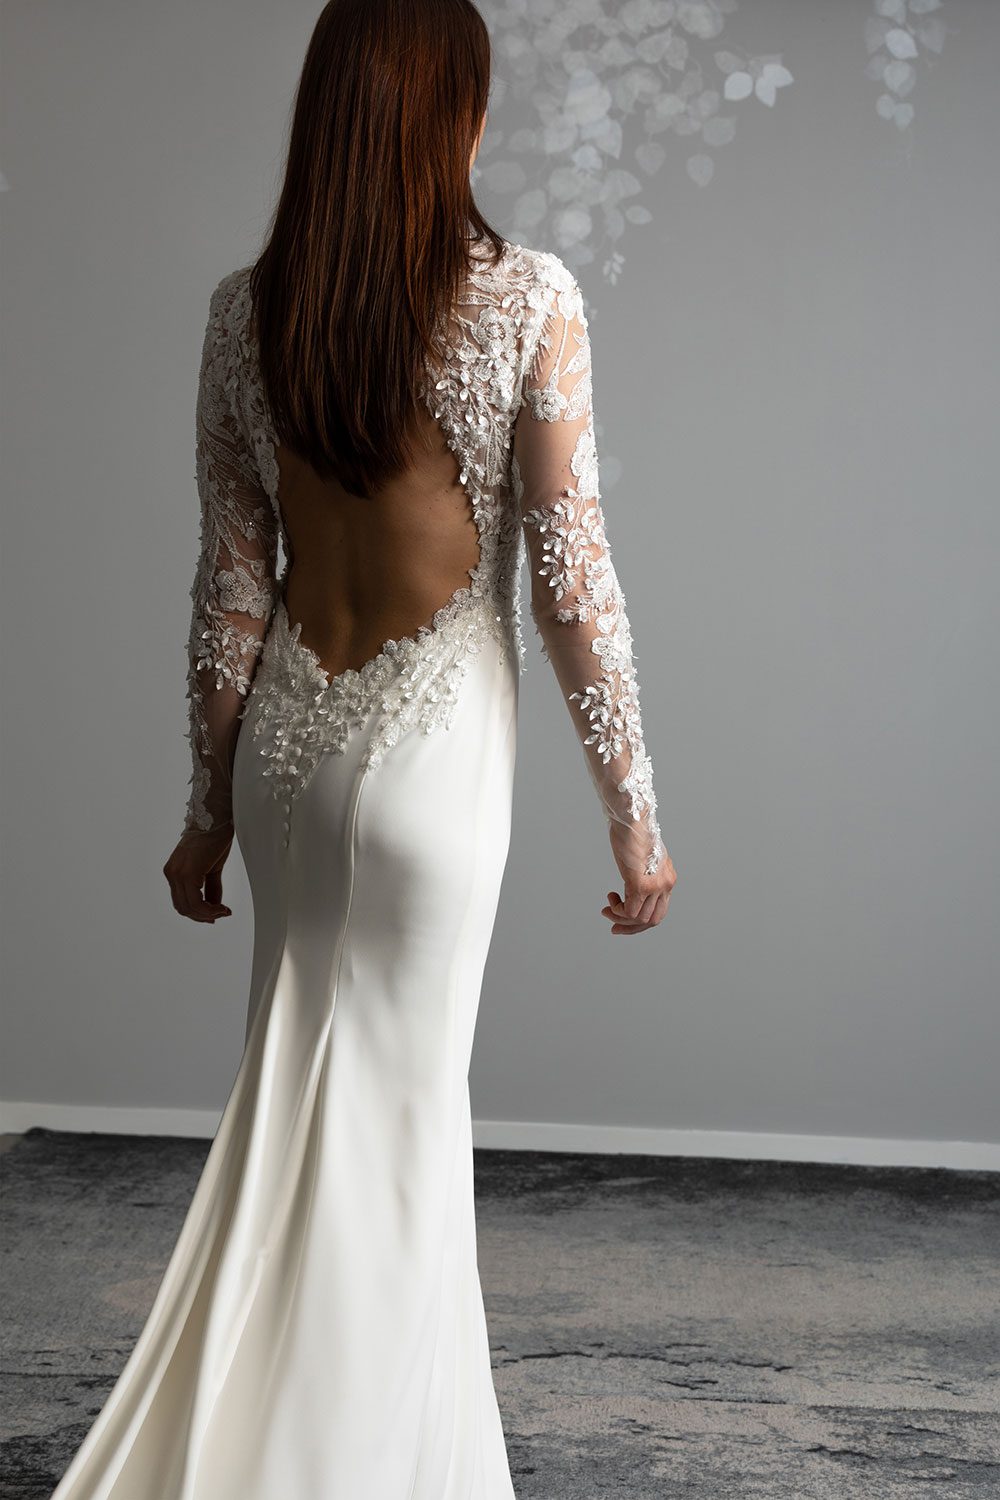 Moana Wedding gown from Vinka Design - Spectacular wedding dress perfect for the modern bride who still wants a classic spark! 3D lace embroidery complemented by a high neckline, fitted sleeves, and stunning low back into a flare train. Model showing back of the gown with cut out 3D lace and embroidered back detail and long train